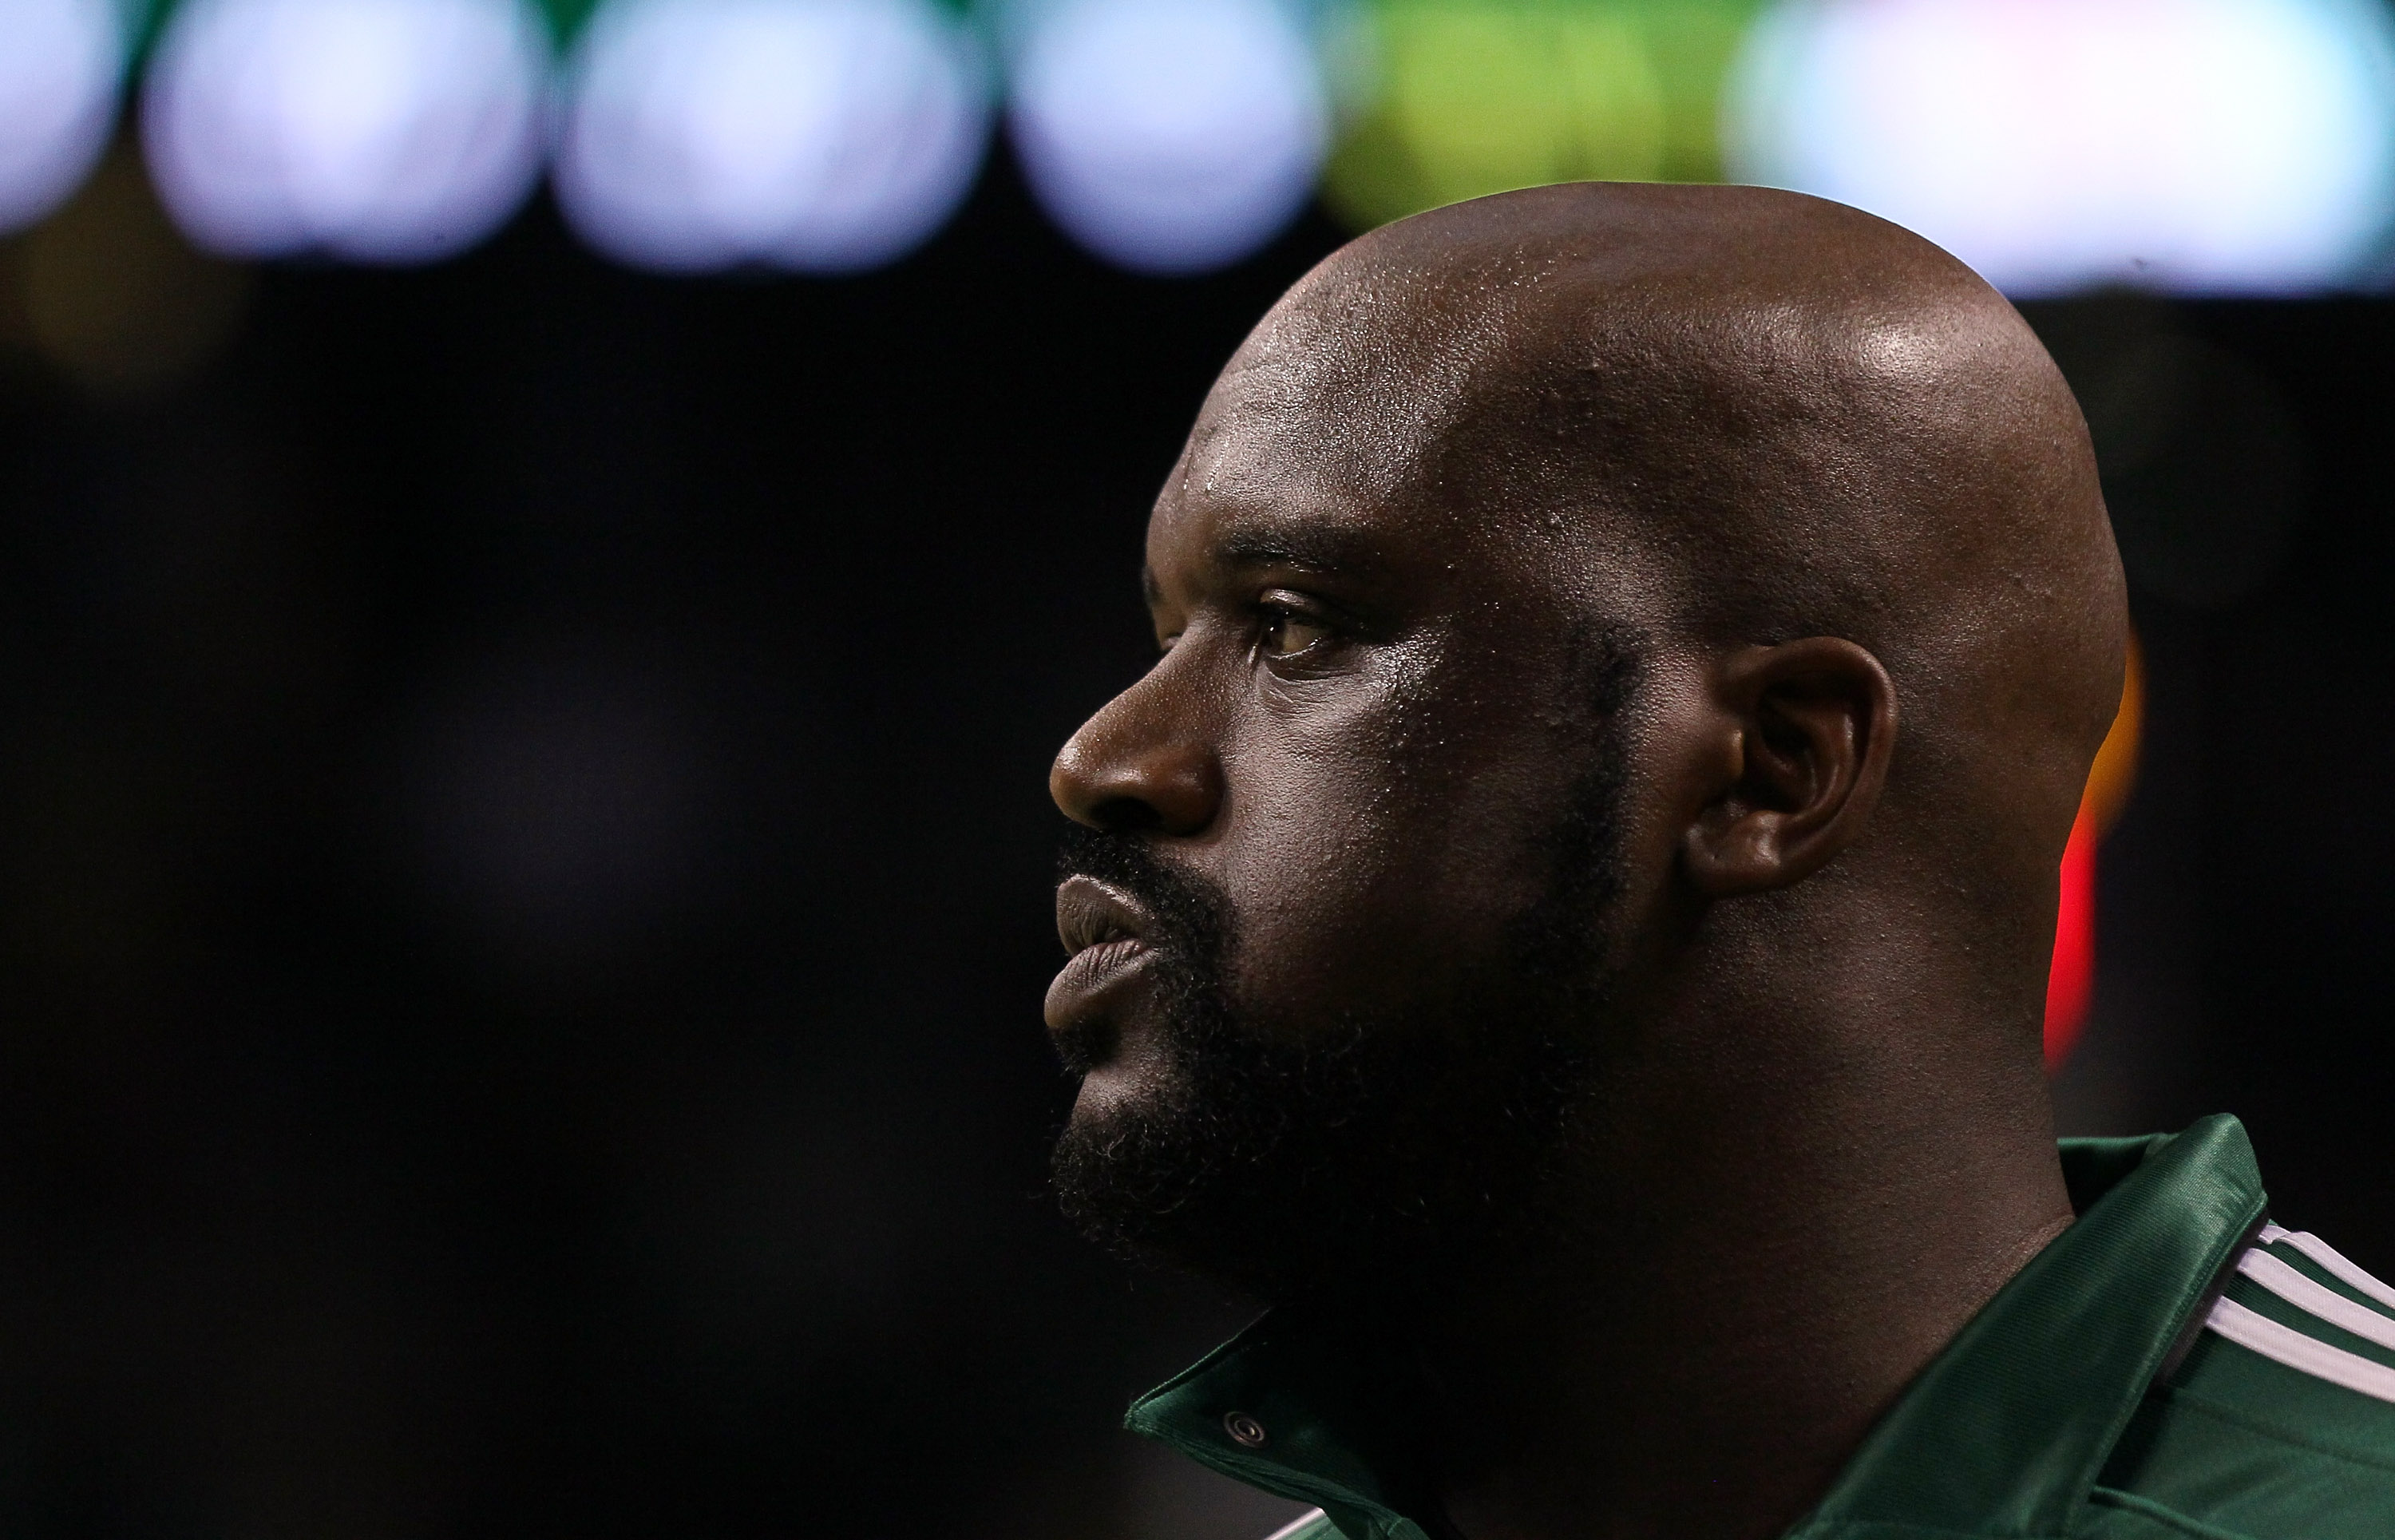 BOSTON, MA - MAY 07: Shaquille O'Neal #36 of the Boston Celtics warms up before Game Three of the Eastern Conference Semifinals in the 2011 NBA Playoffs on May 7, 2011 at the TD Garden in Boston, Massachusetts.  NOTE TO USER: User expressly acknowledges a